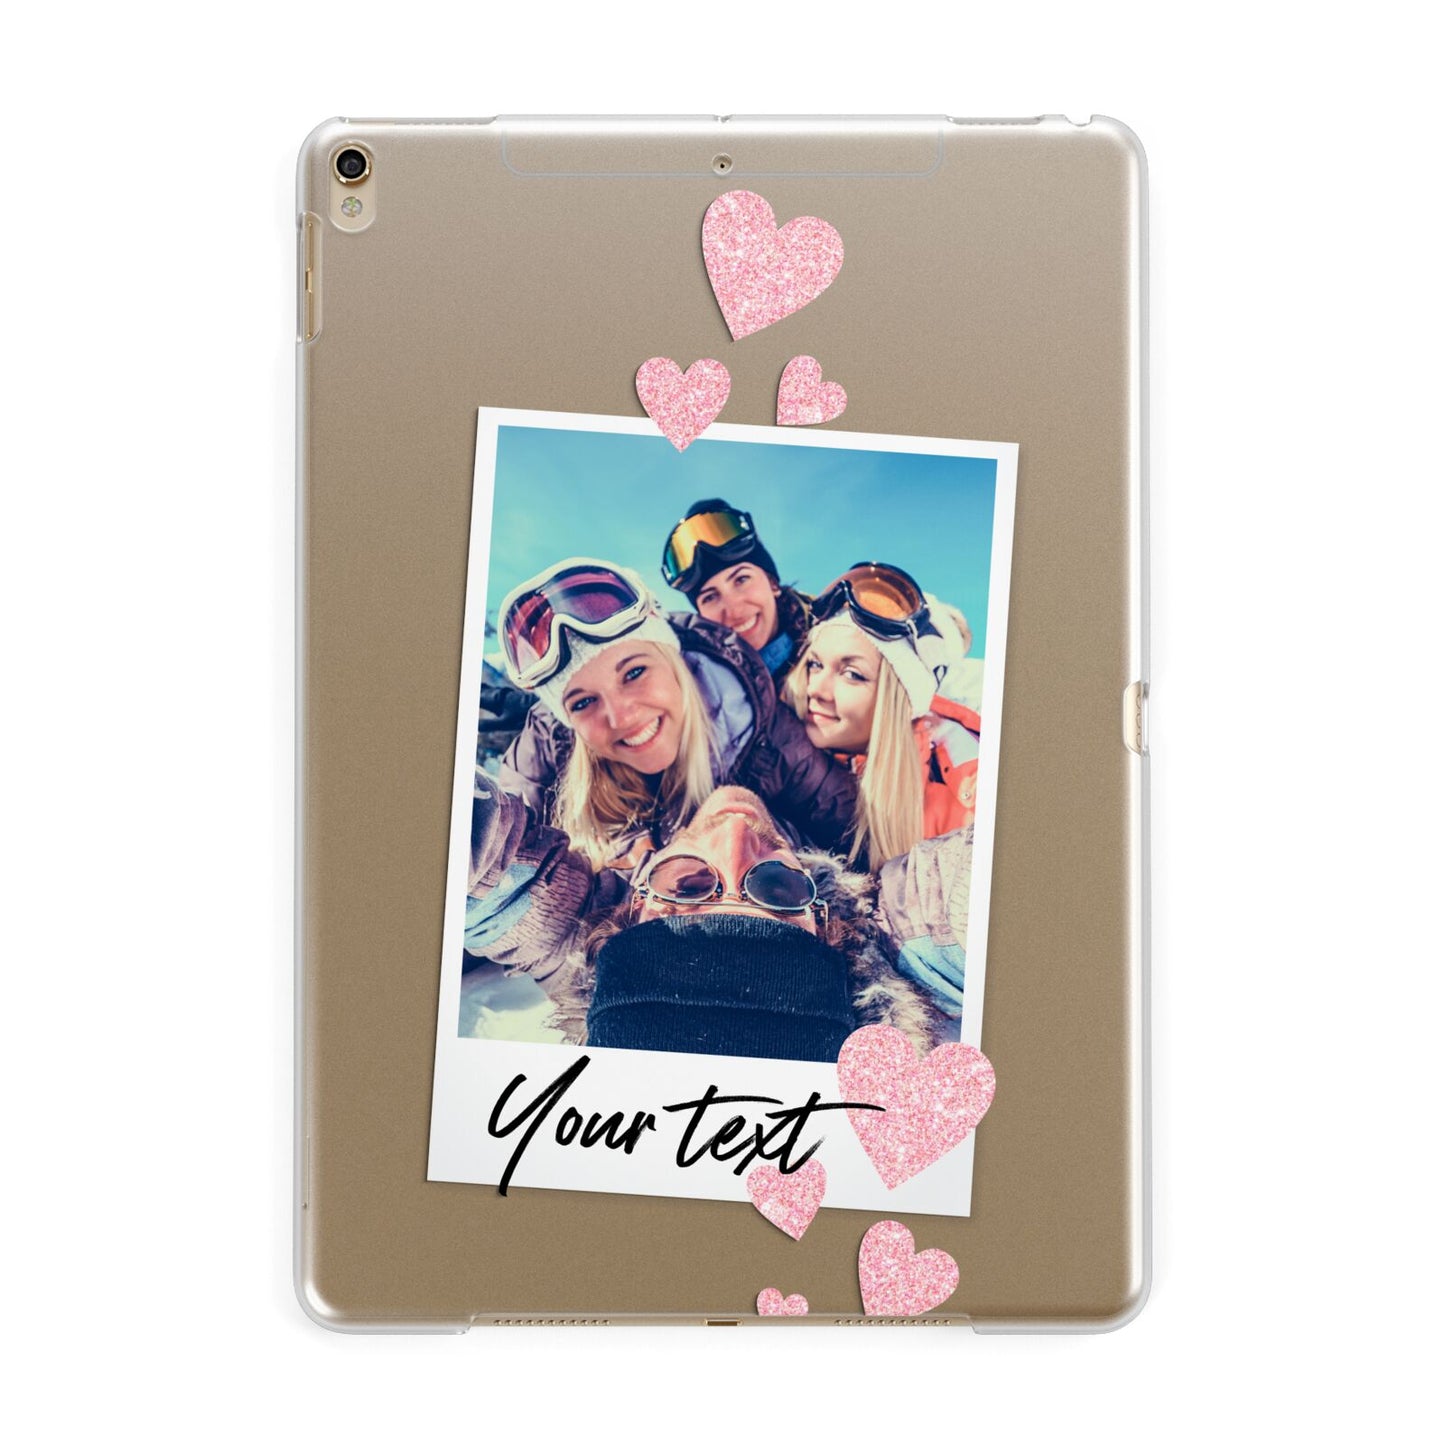 Photo with Text Apple iPad Gold Case